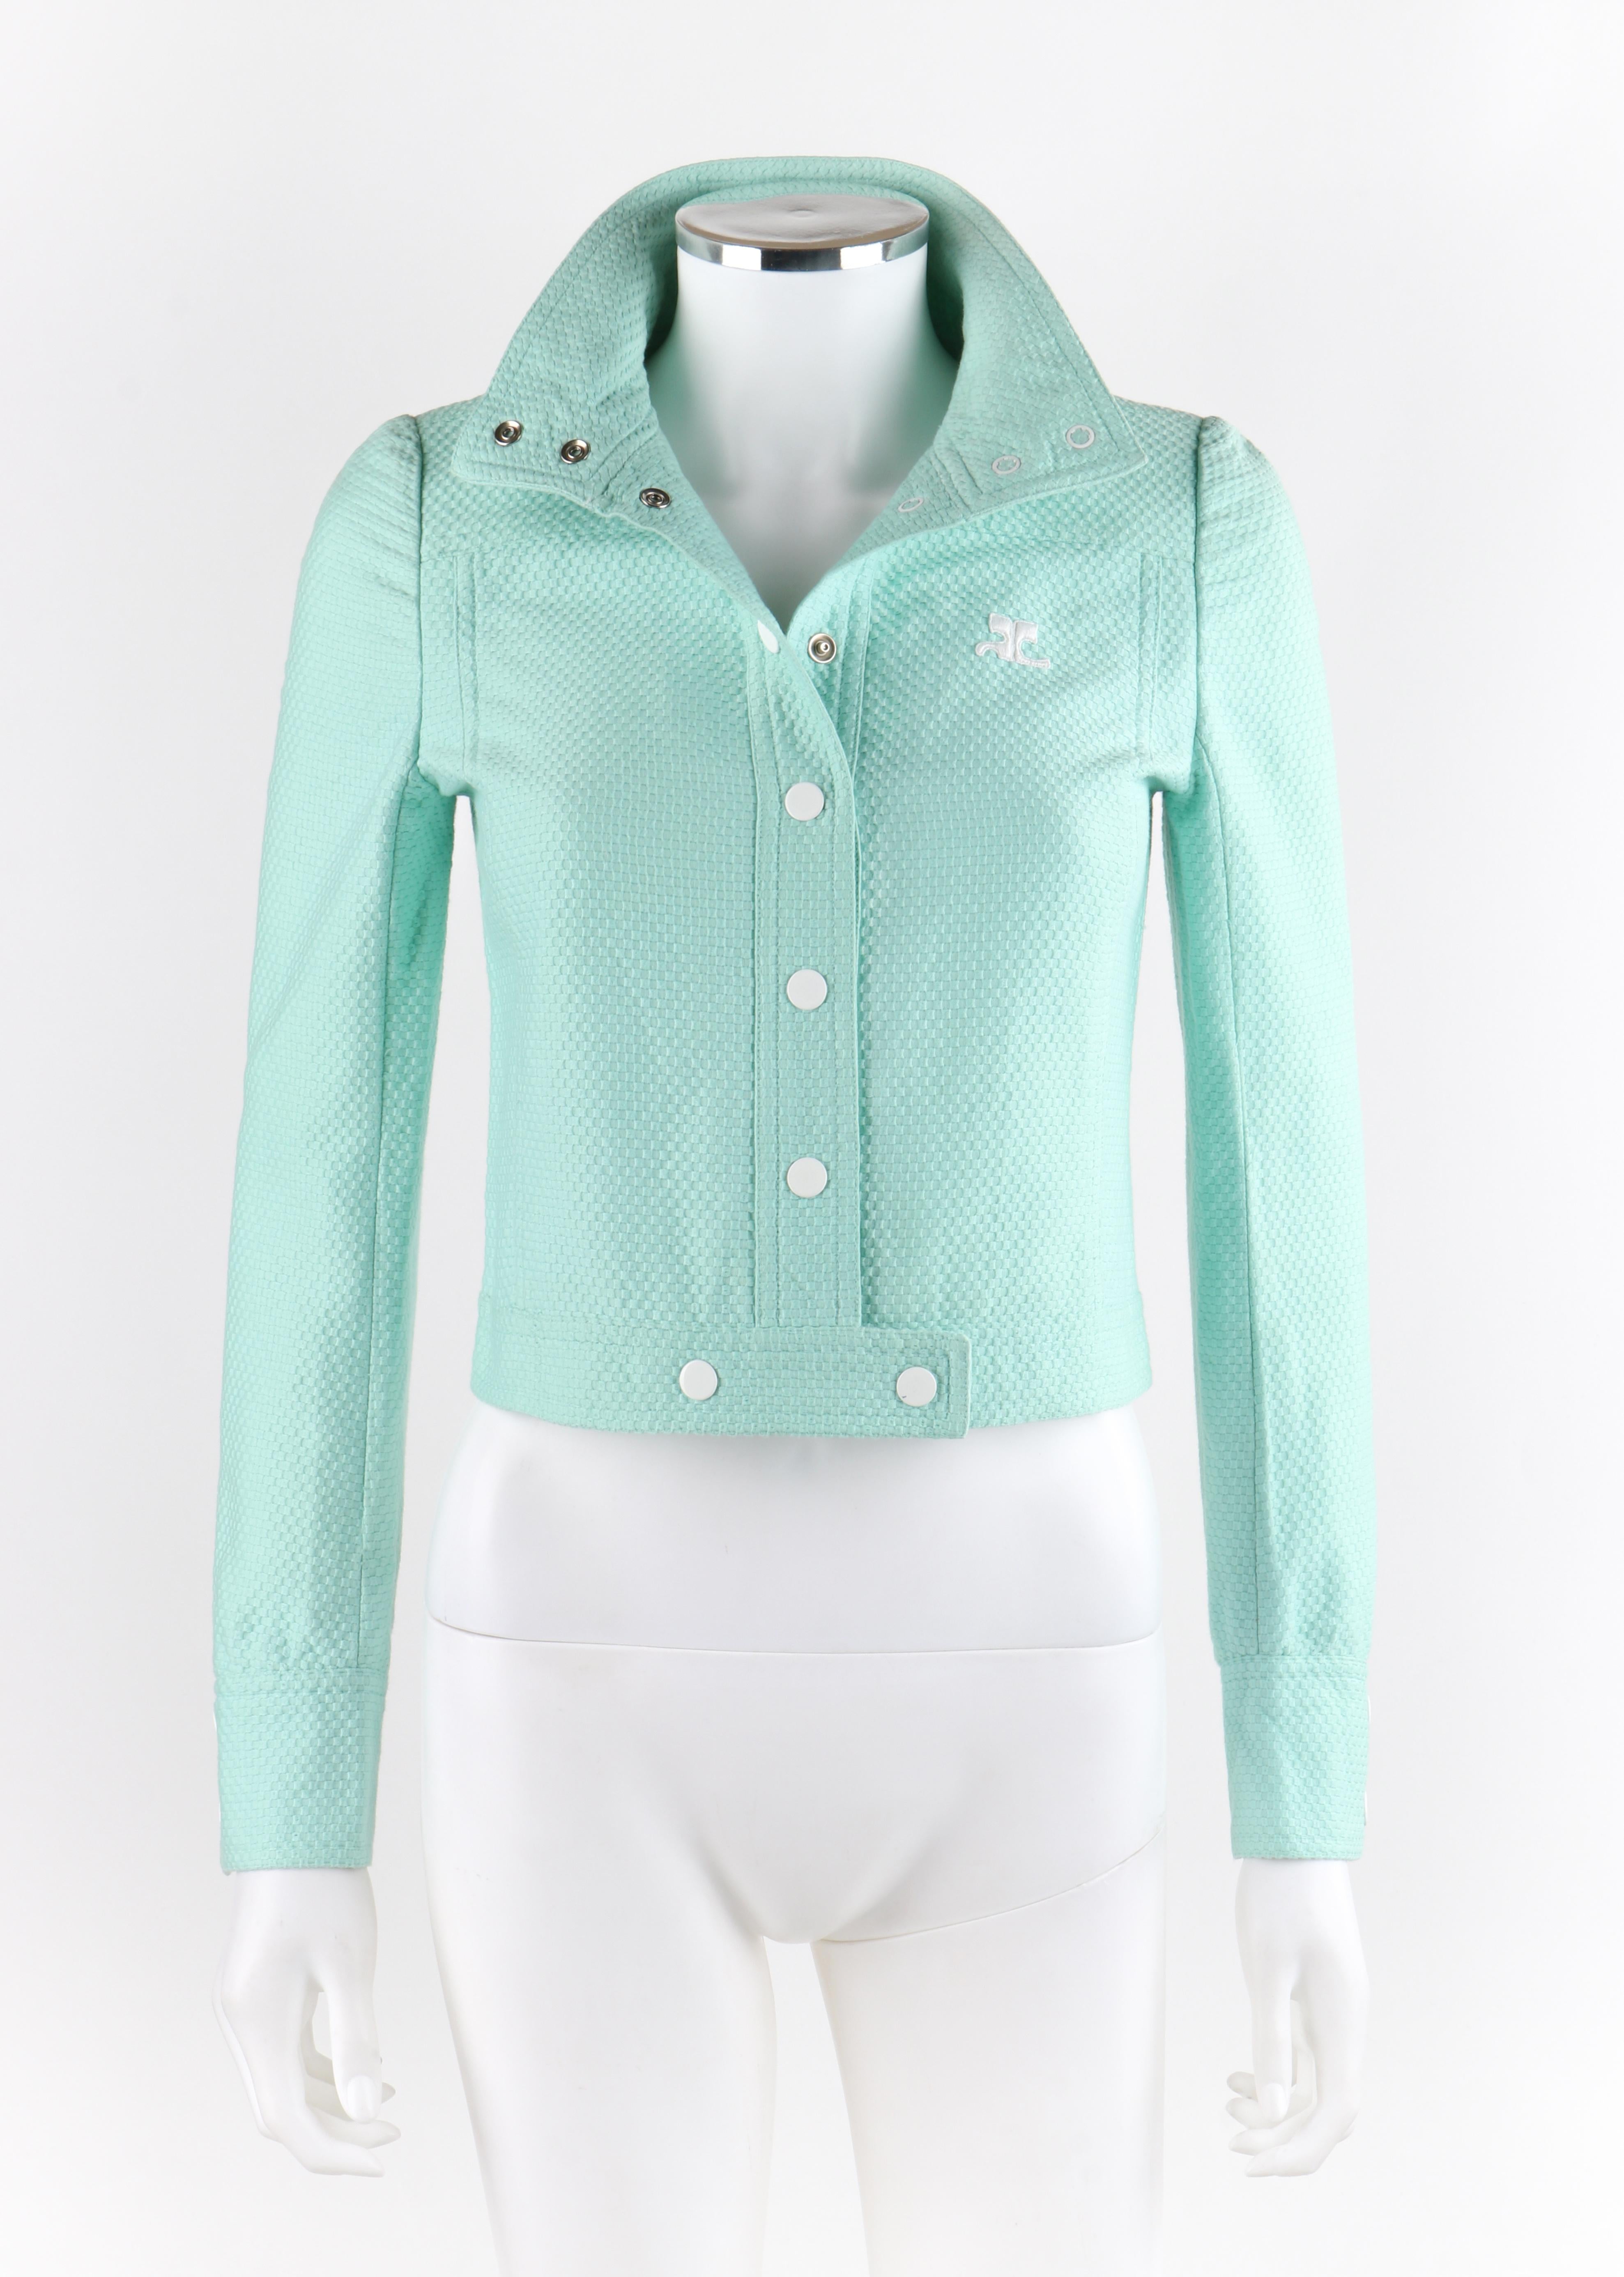 COURREGES c.1970’s Mint Blue Embroidered Signature Logo Mod Cropped Jacket
 
Circa: 1970’s
Label(s): Courreges Paris
Designer: Andre Courreges
Style: Cropped jacket
Color(s): Mint blue
Lined: No
Marked Fabric Content: “100% Cotton”
Unmarked Fabric